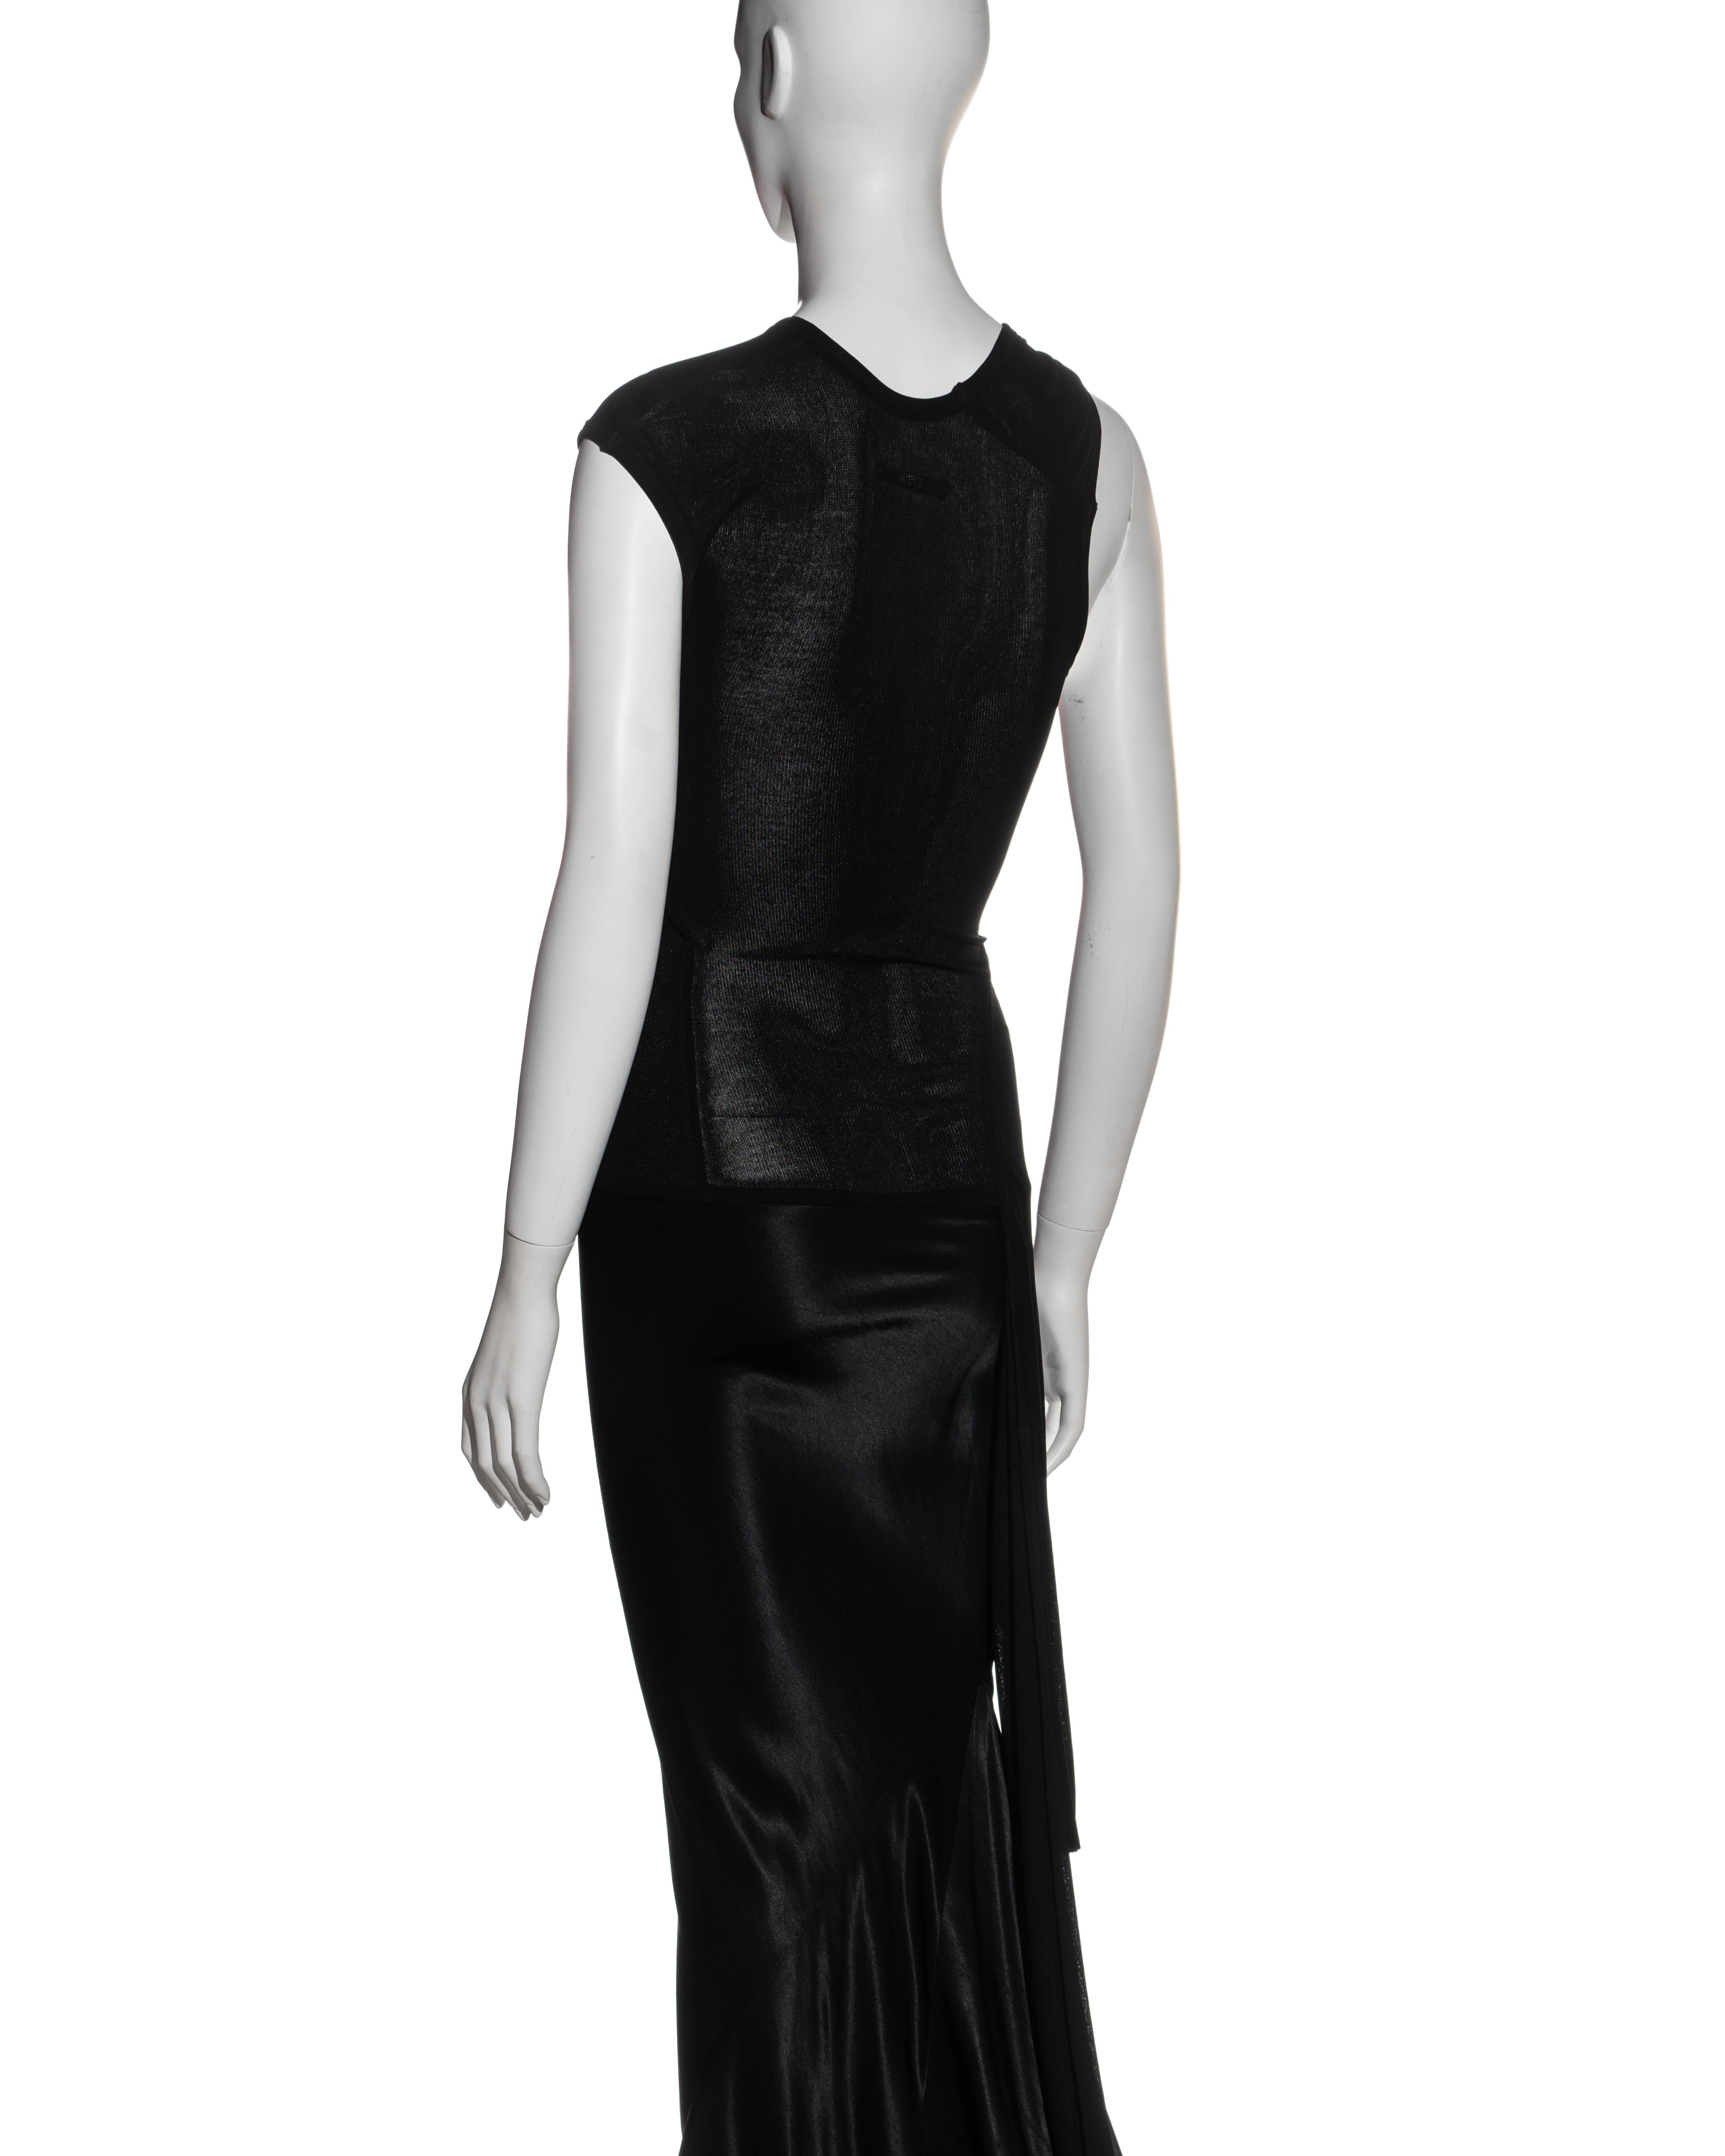 Rick Owens early black silk deconstructed trained evening dress, c. 1995 - 1997 In Good Condition For Sale In London, GB